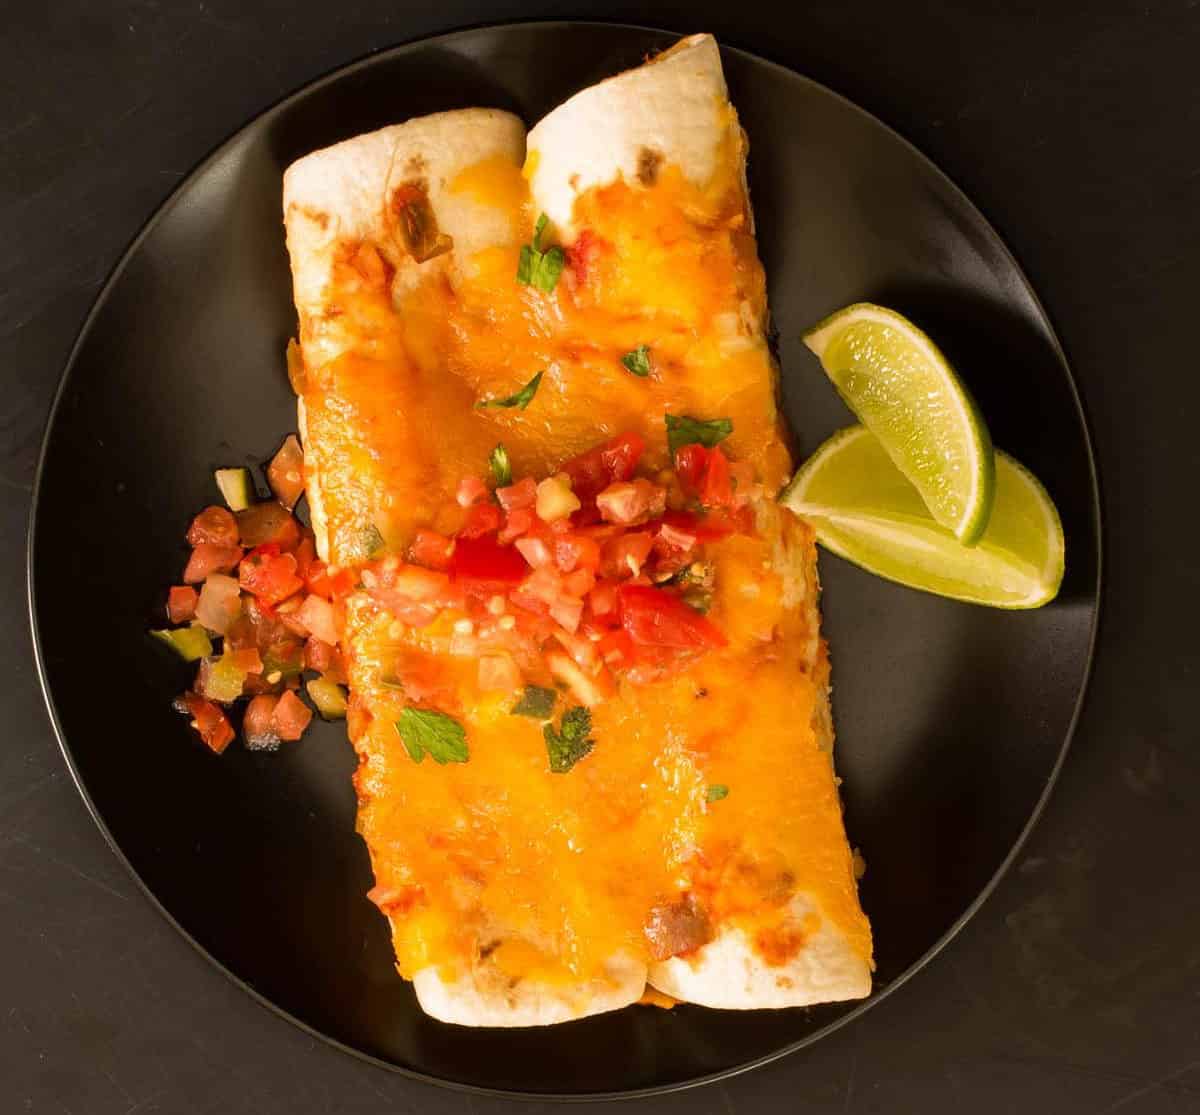  These enchiladas are so good, they'll make your taste buds dance.